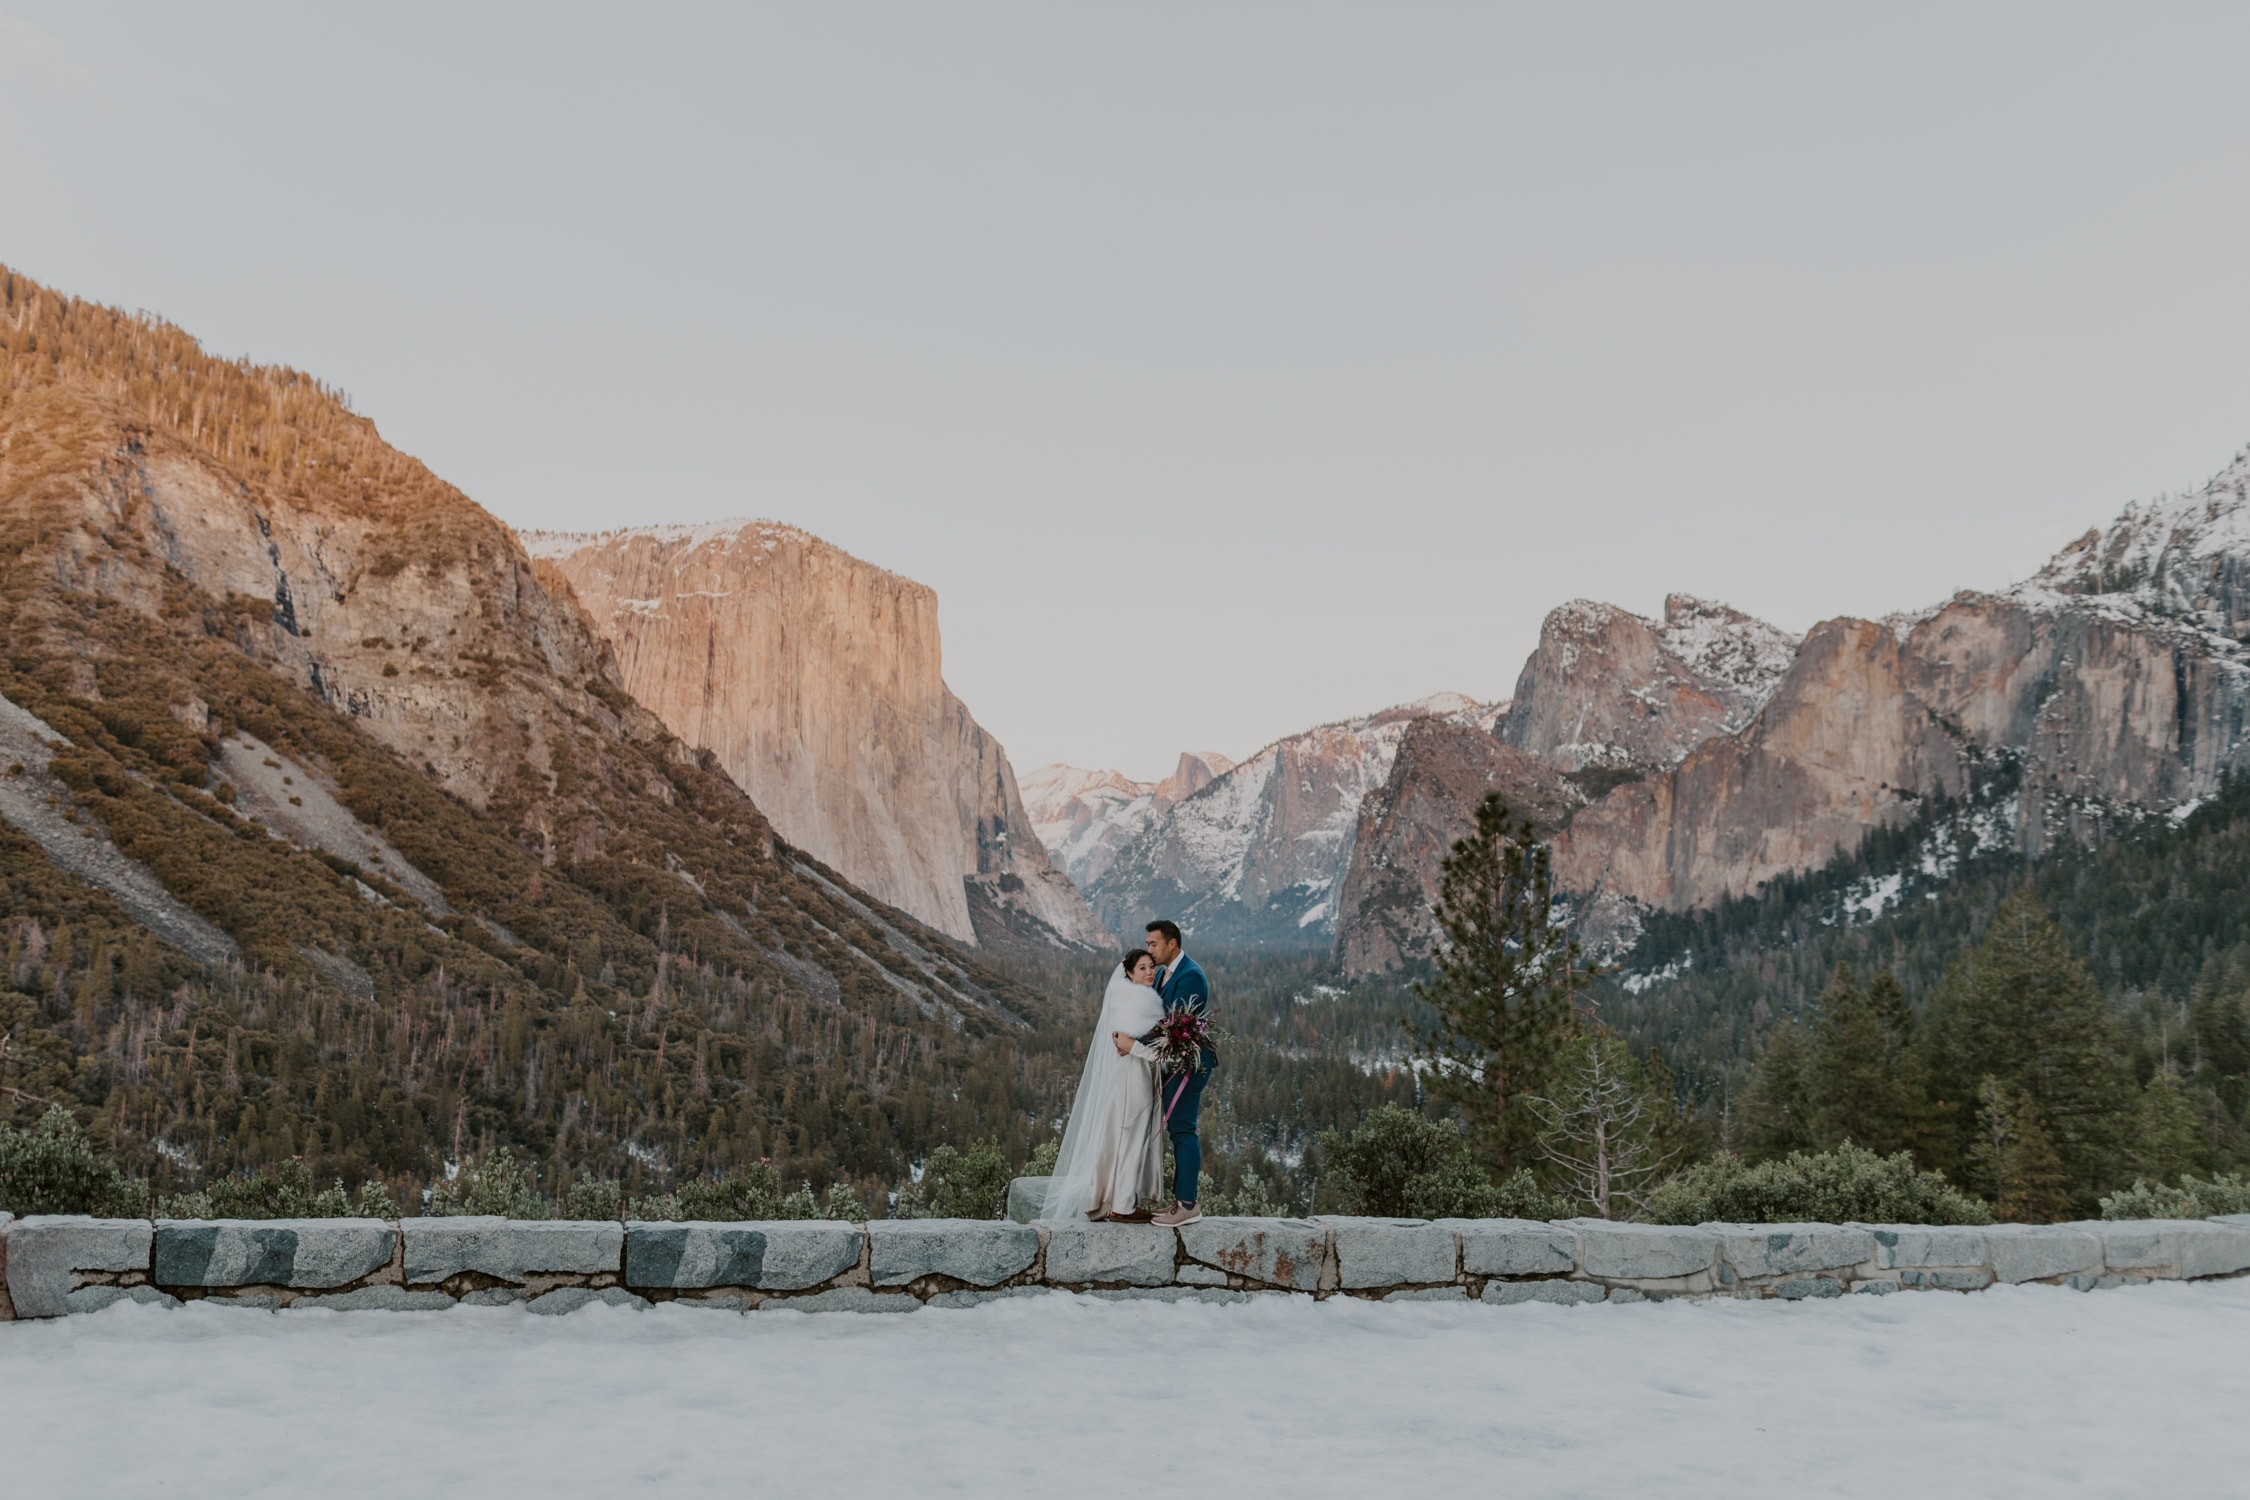 A groom kissing his brides temple at Tunnel View in Yosemite National Park.